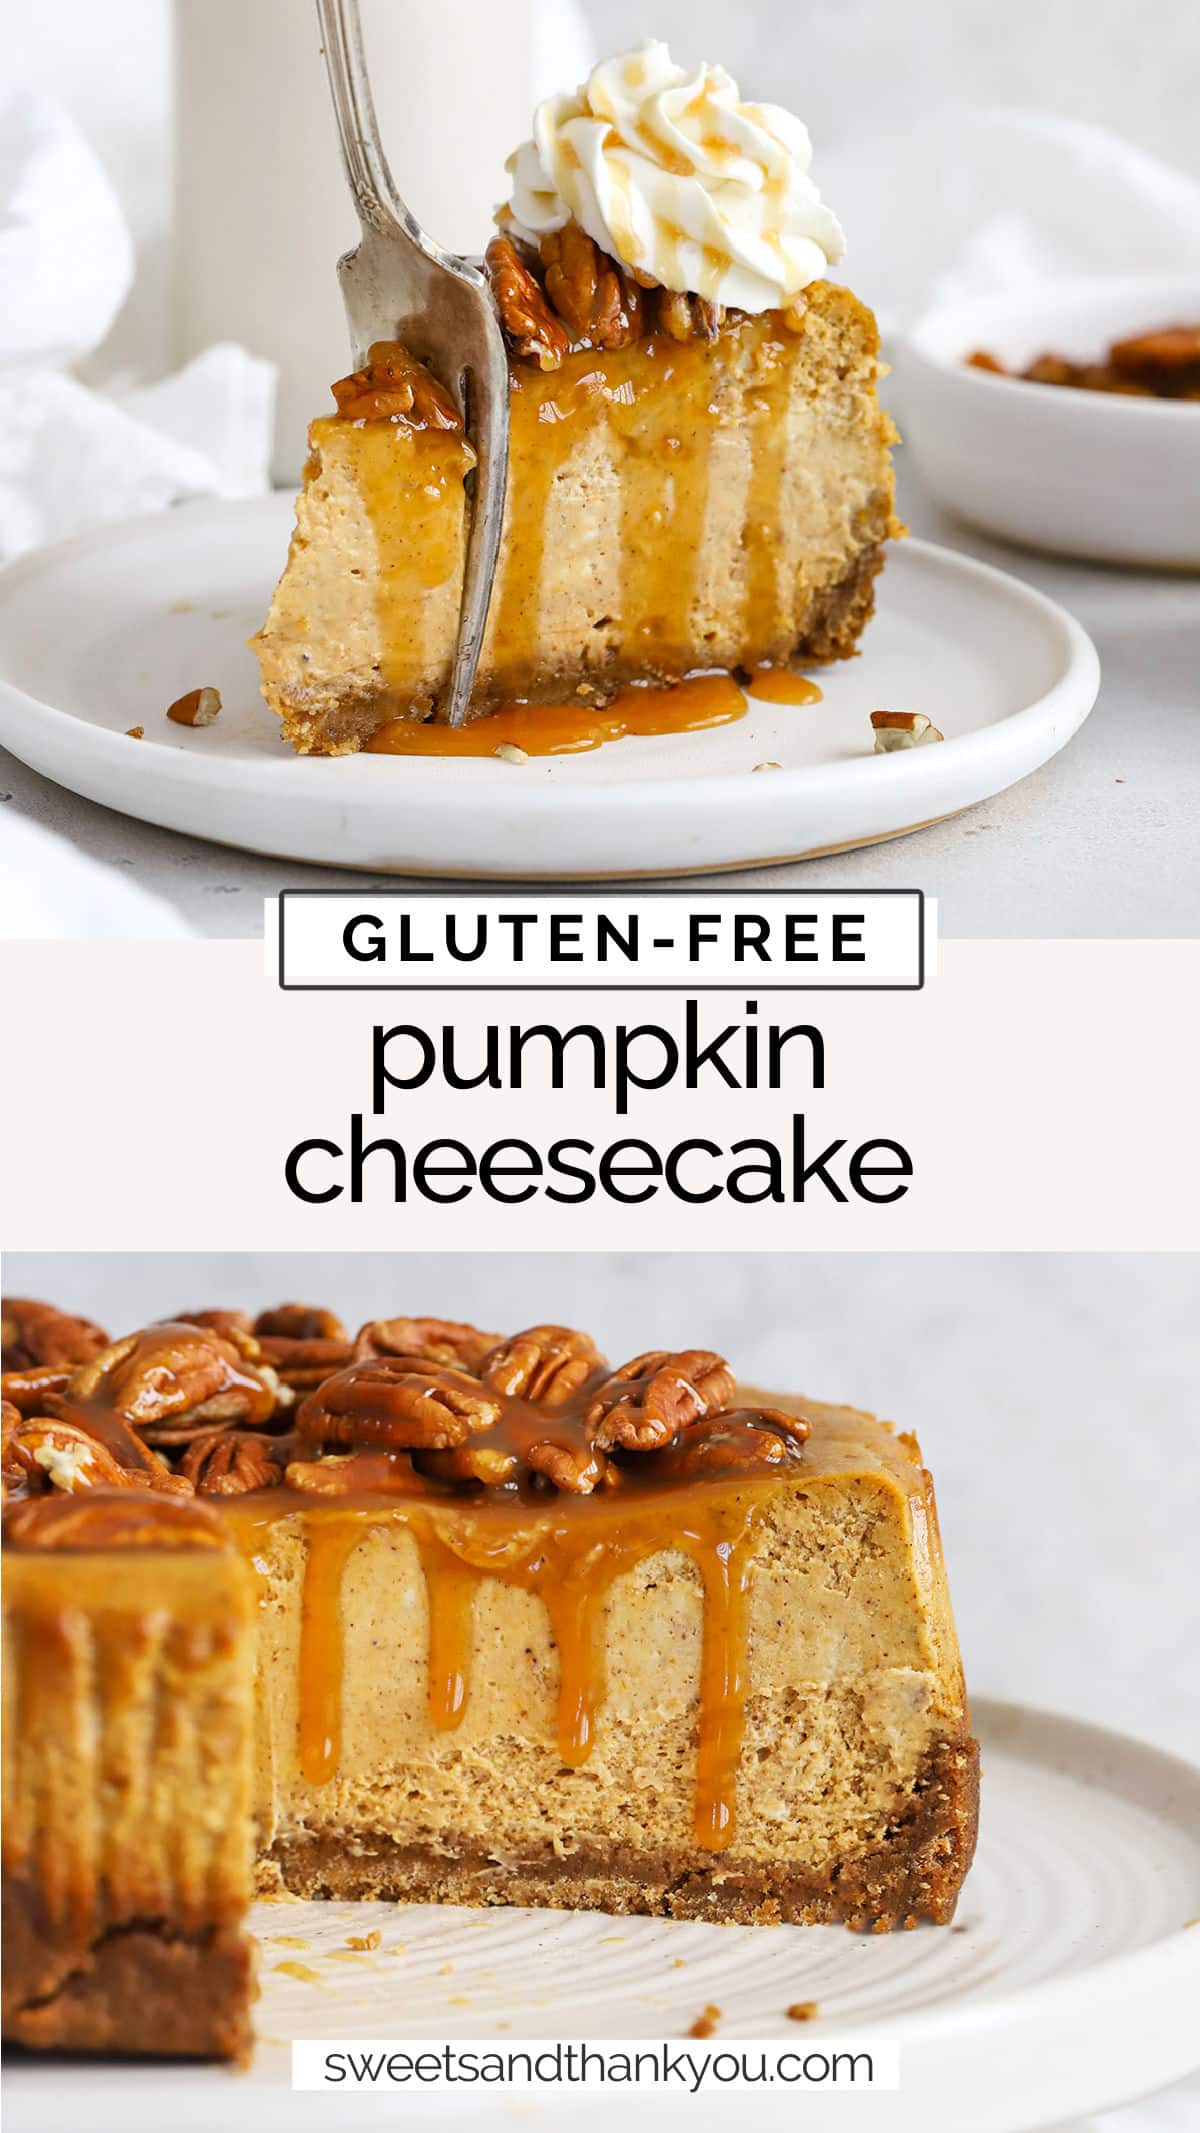 Gluten-Free Pumpkin Cheesecake - This easy gluten-free cheesecake recipe is perfect for pumpkin season! Try it at Thanksgiving or Christmas as a fun alternative to pie. / gluten free pumpkin cheesecake recipe / gluten free pumpkin dessert / gluten free thanksgiving dessert // gluten free Christmas dessert // gluten free pumpkin recipe / gluten free cheesecake crust // gluten free cheesecake filling / gluten-free pumpkin caramel cheesecake / gluten-free pumpkin pecan cheesecake